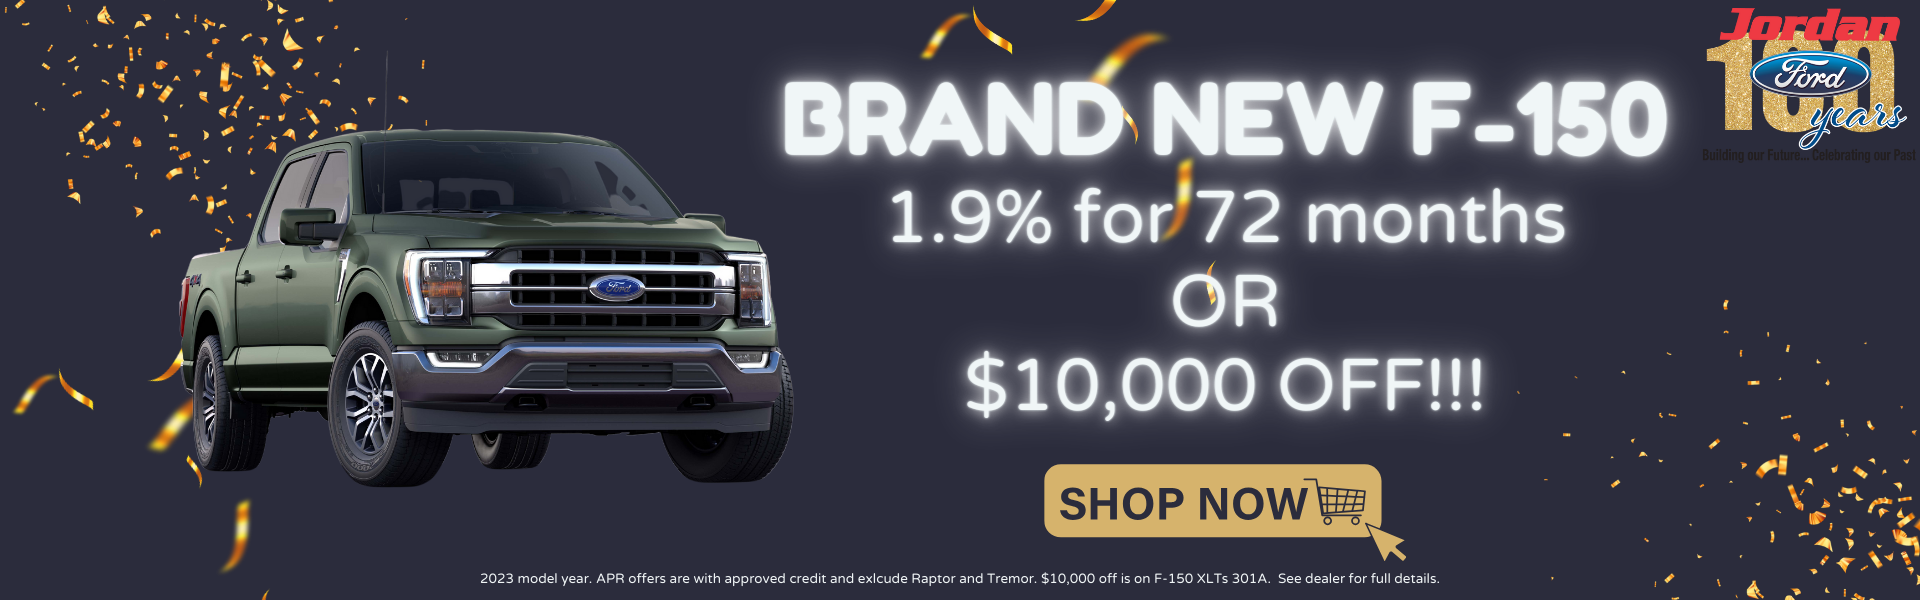 2023 F-150 1.9% for 72 months